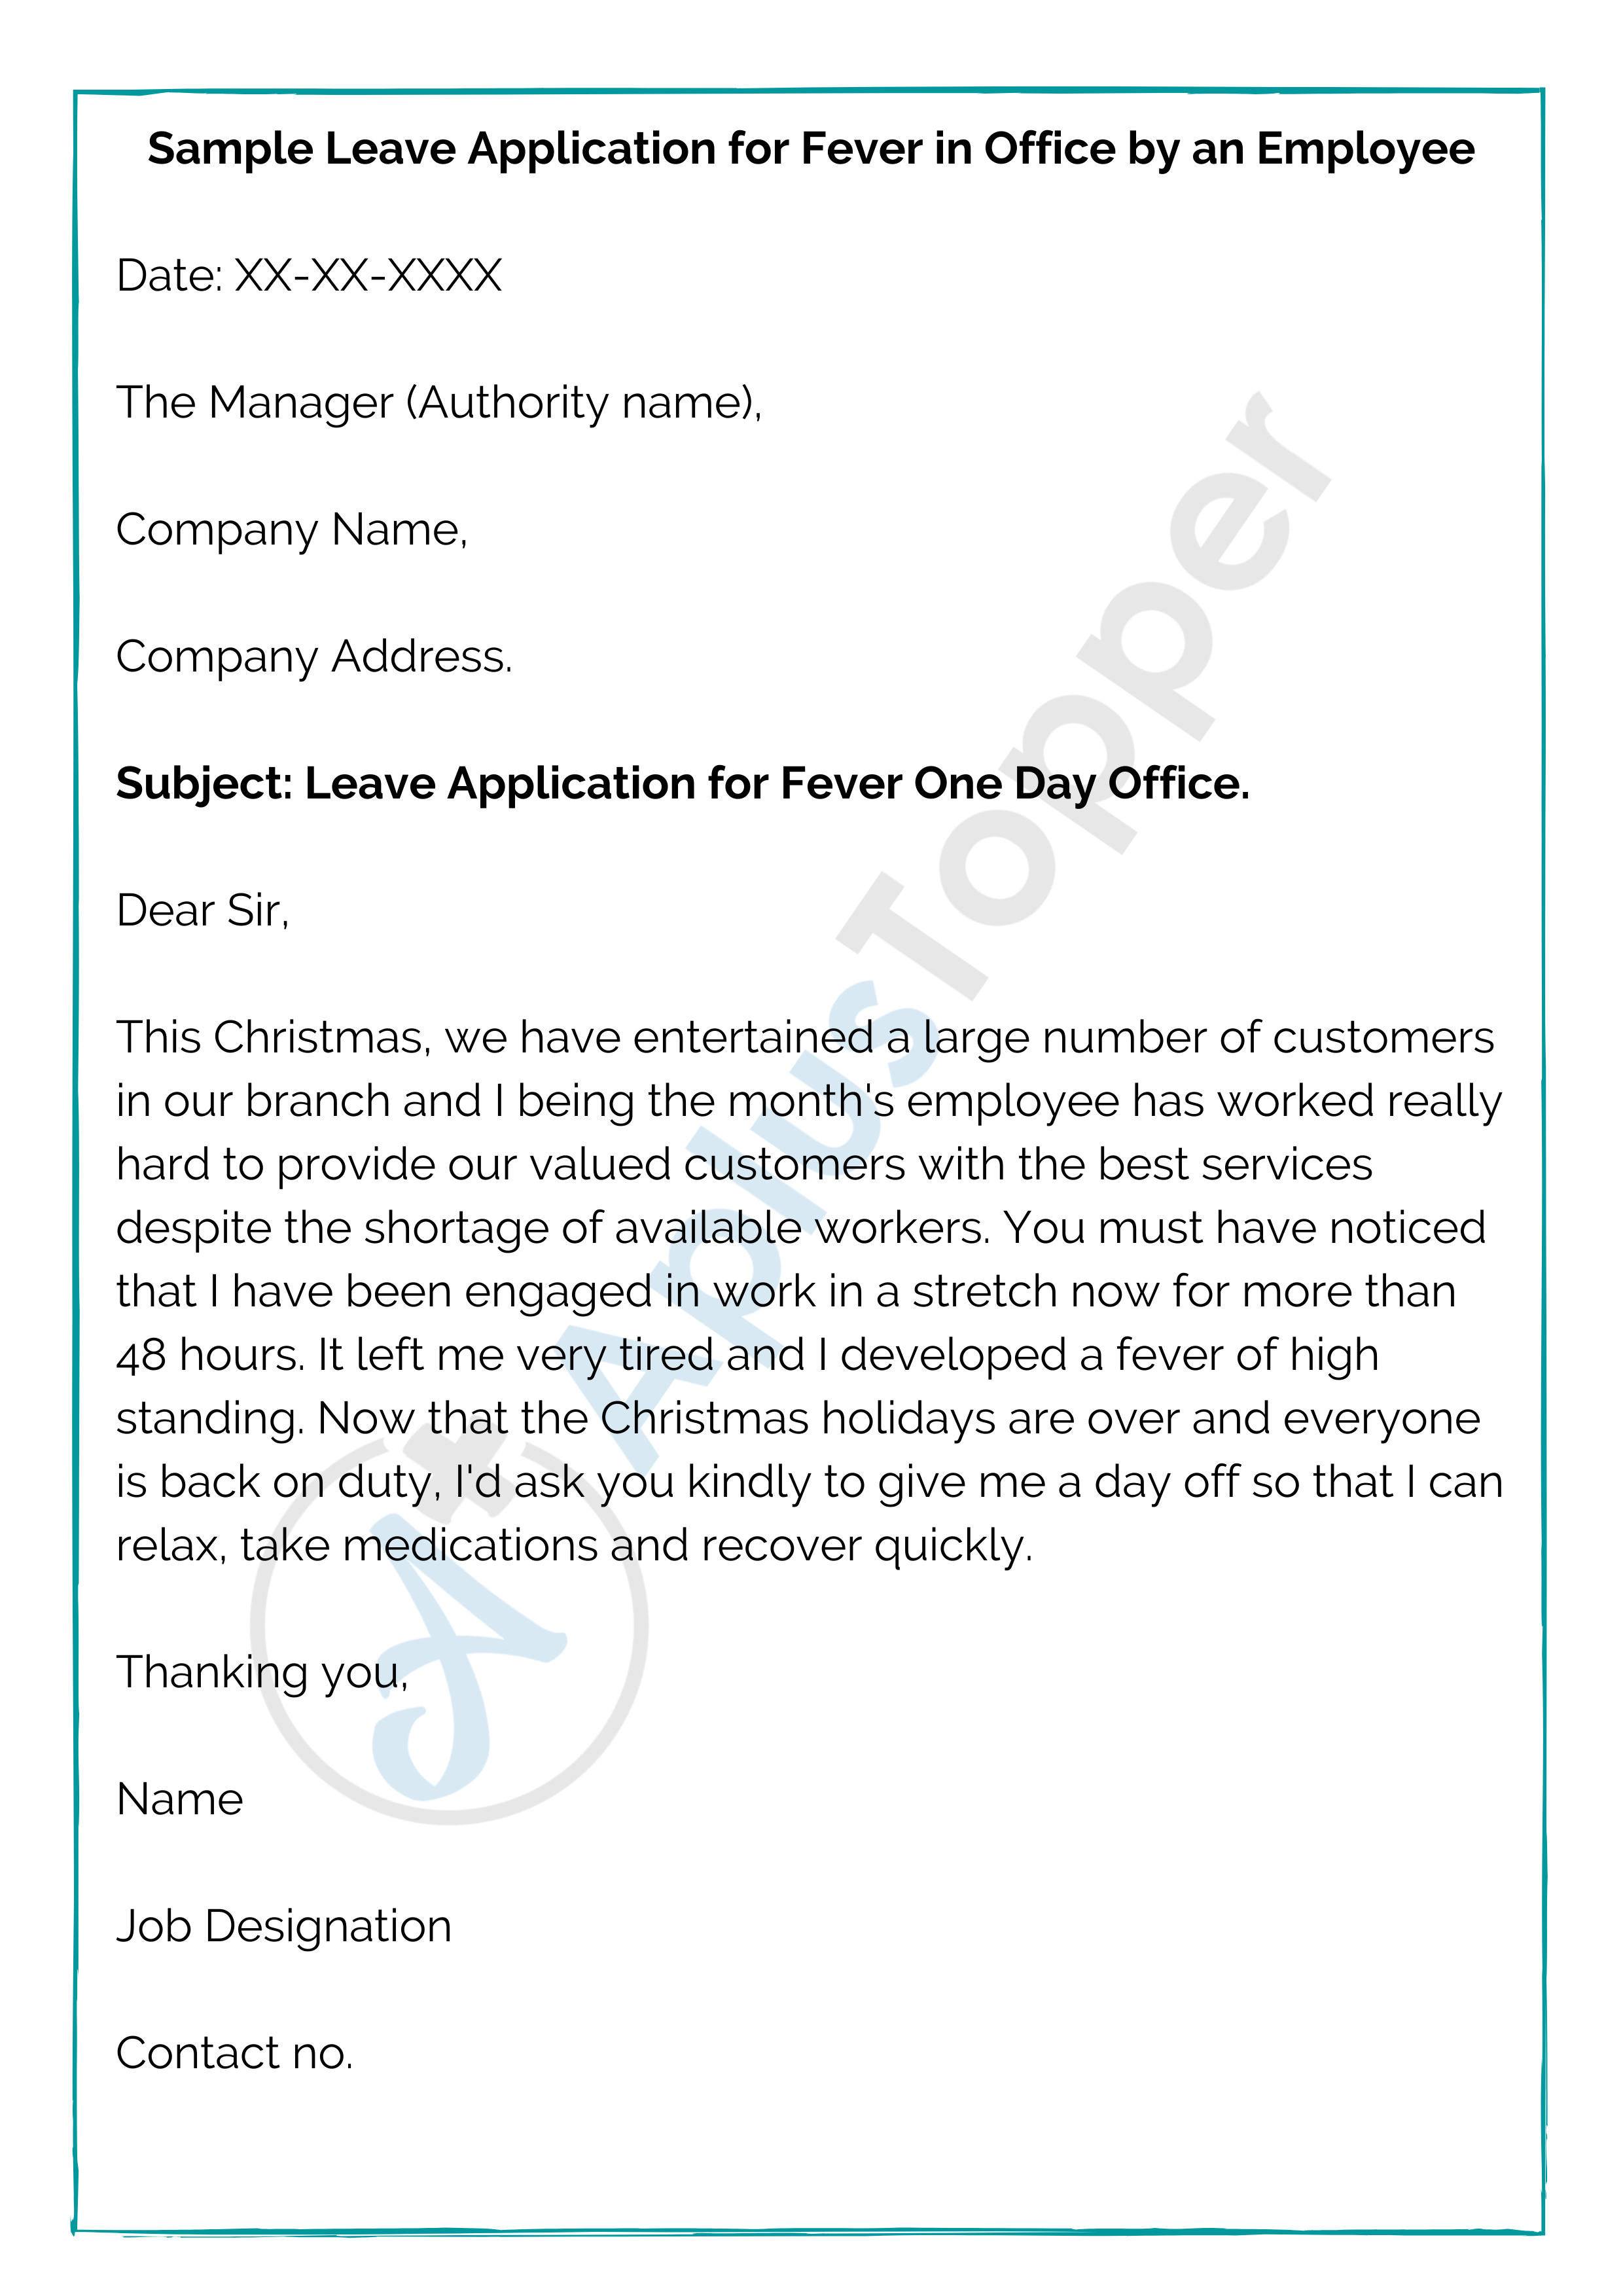 Sample Leave Application for Fever in Office by an Employee